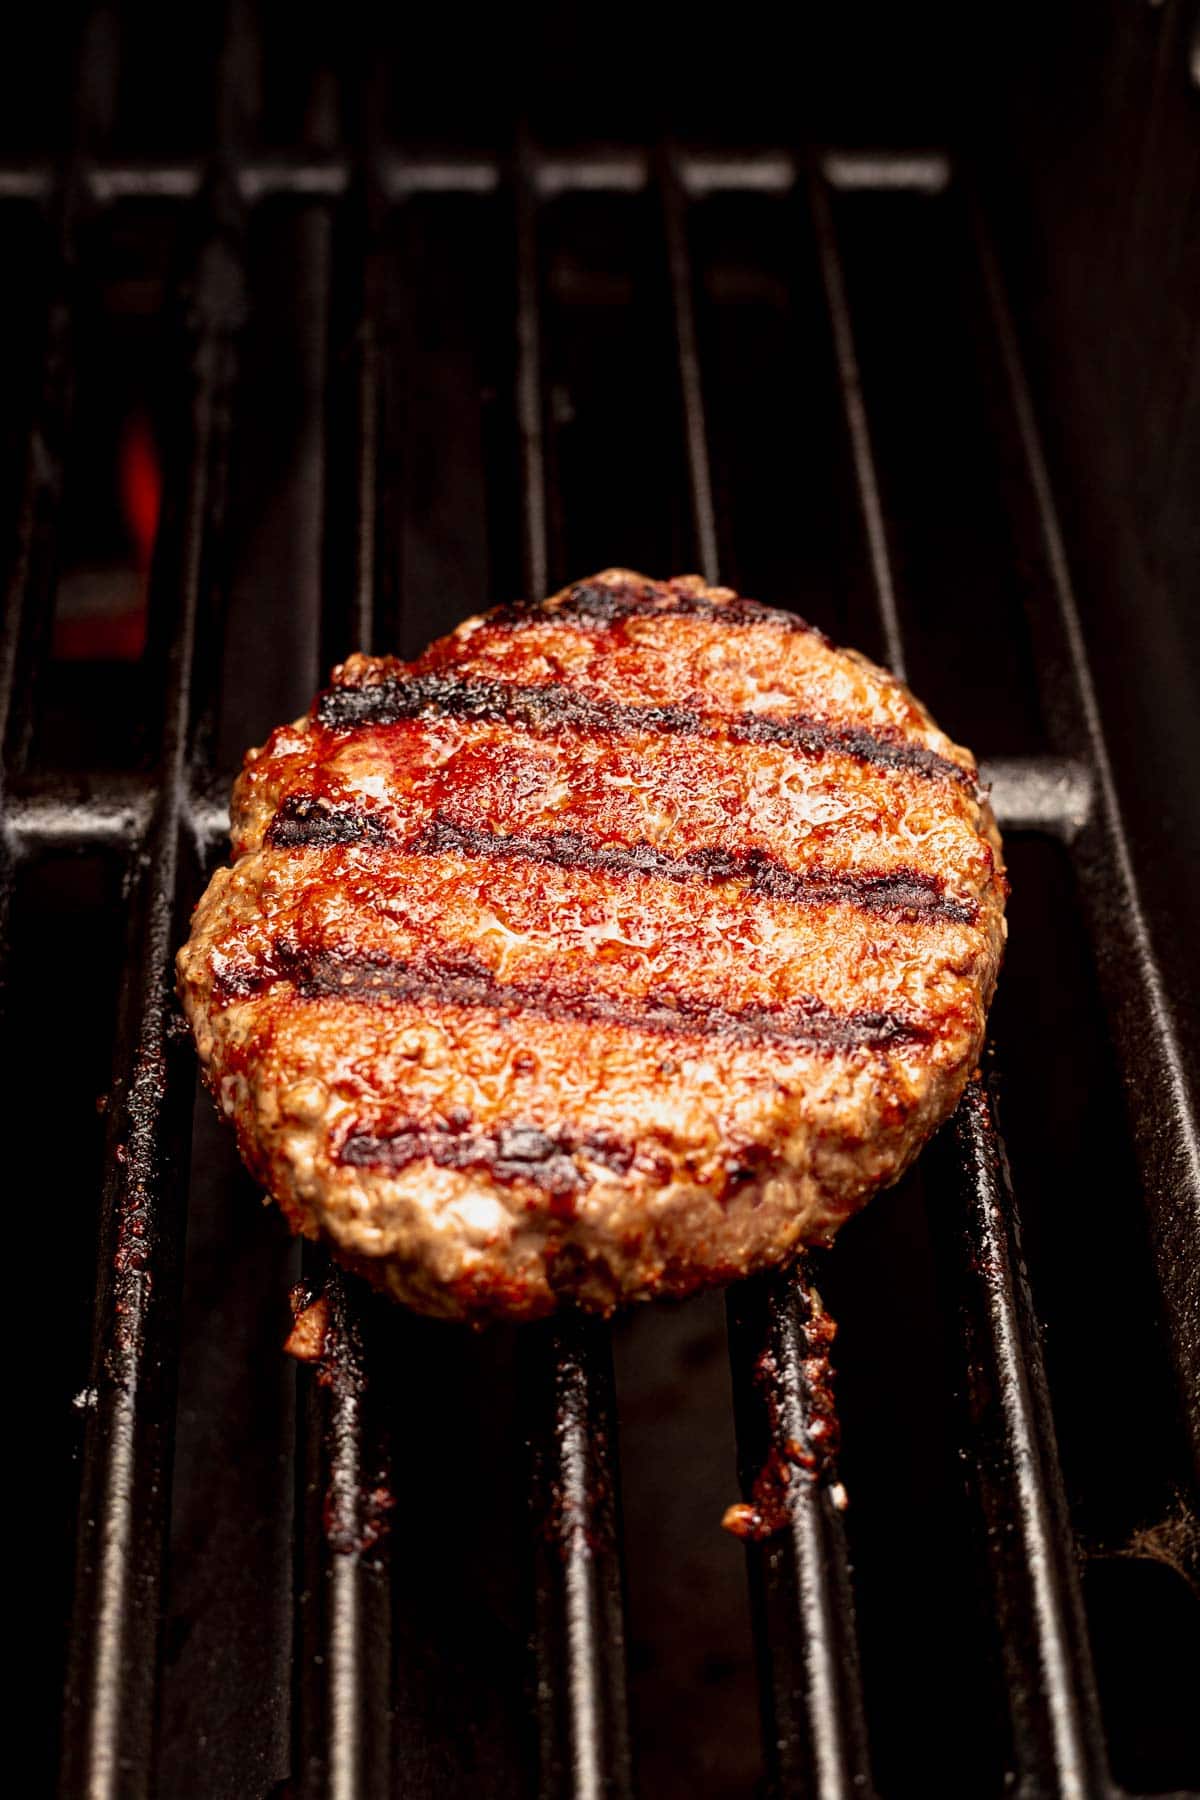 burger patty on hot grill grates